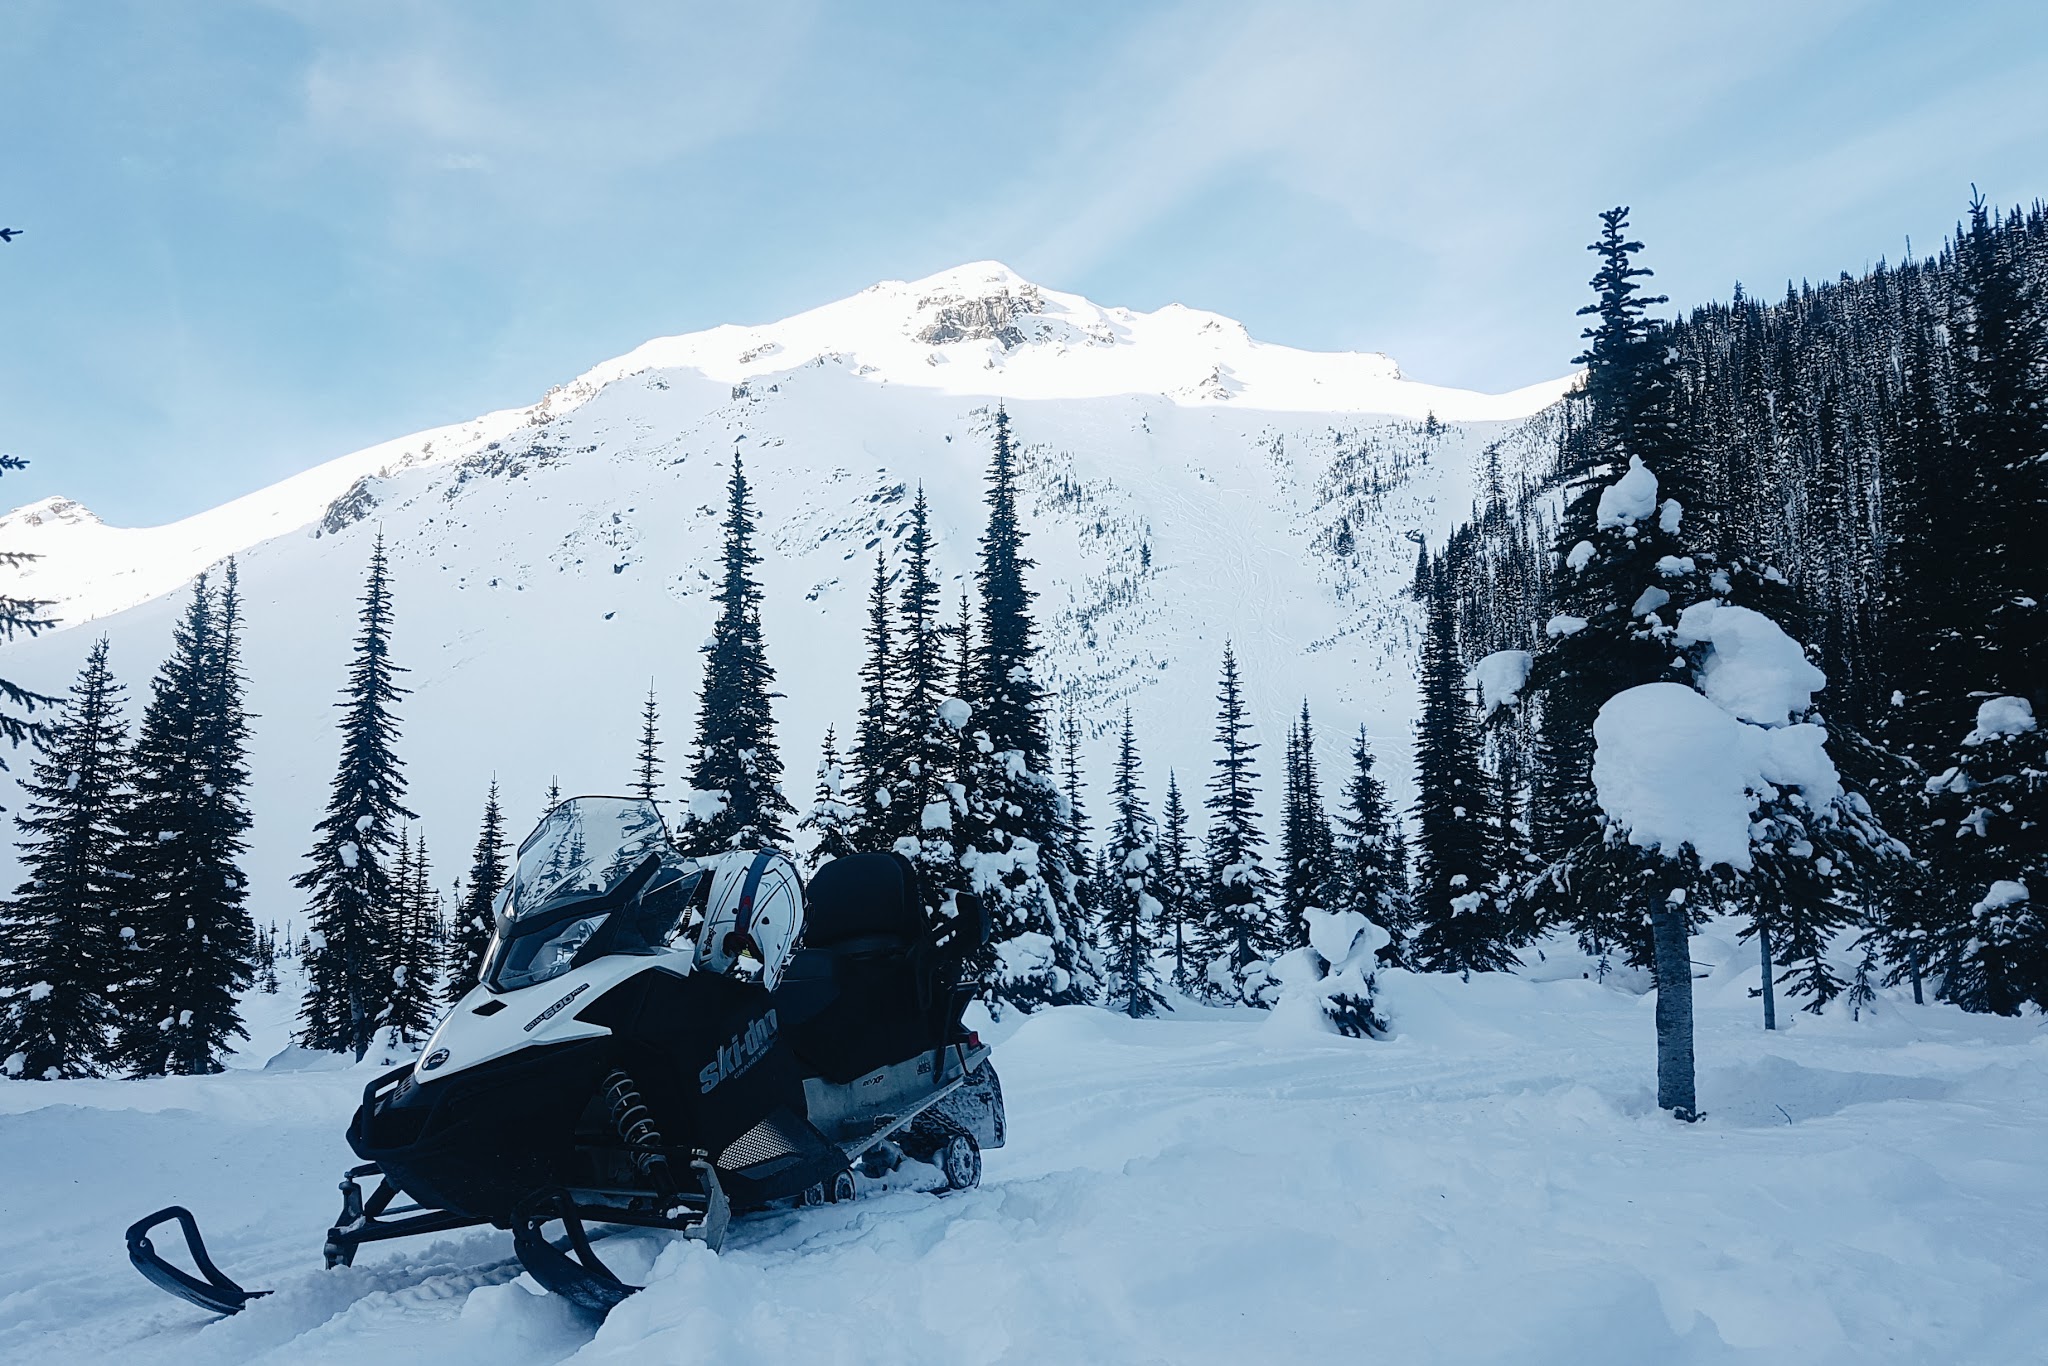 Full Day Kicking Horse Snowmobile Tour By Rocky Mountain Riders